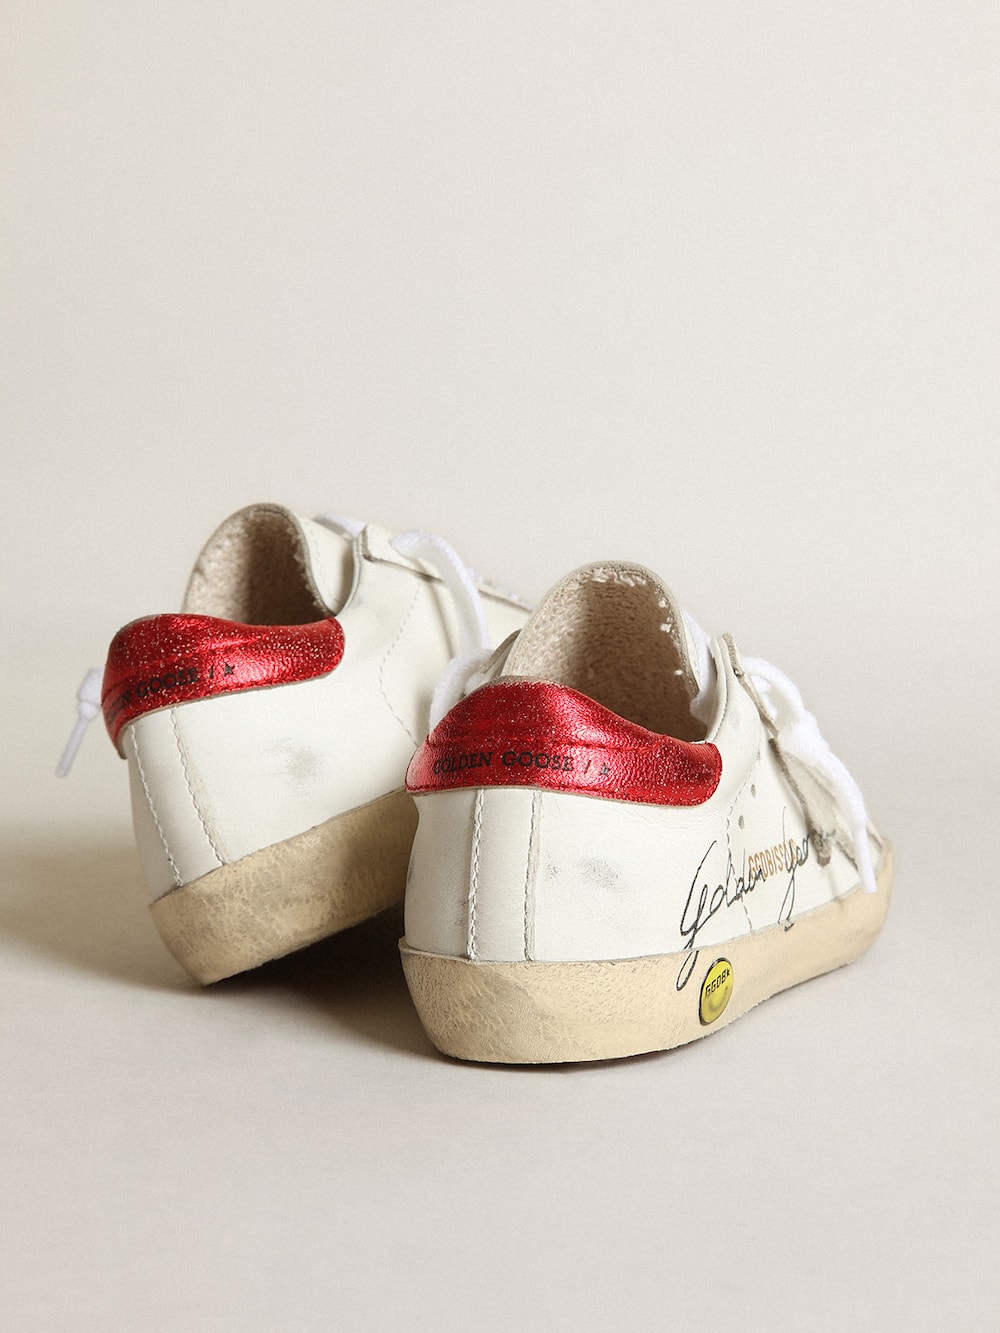 Golden Goose - Junior Super-Star with gray star and red heel tab in 